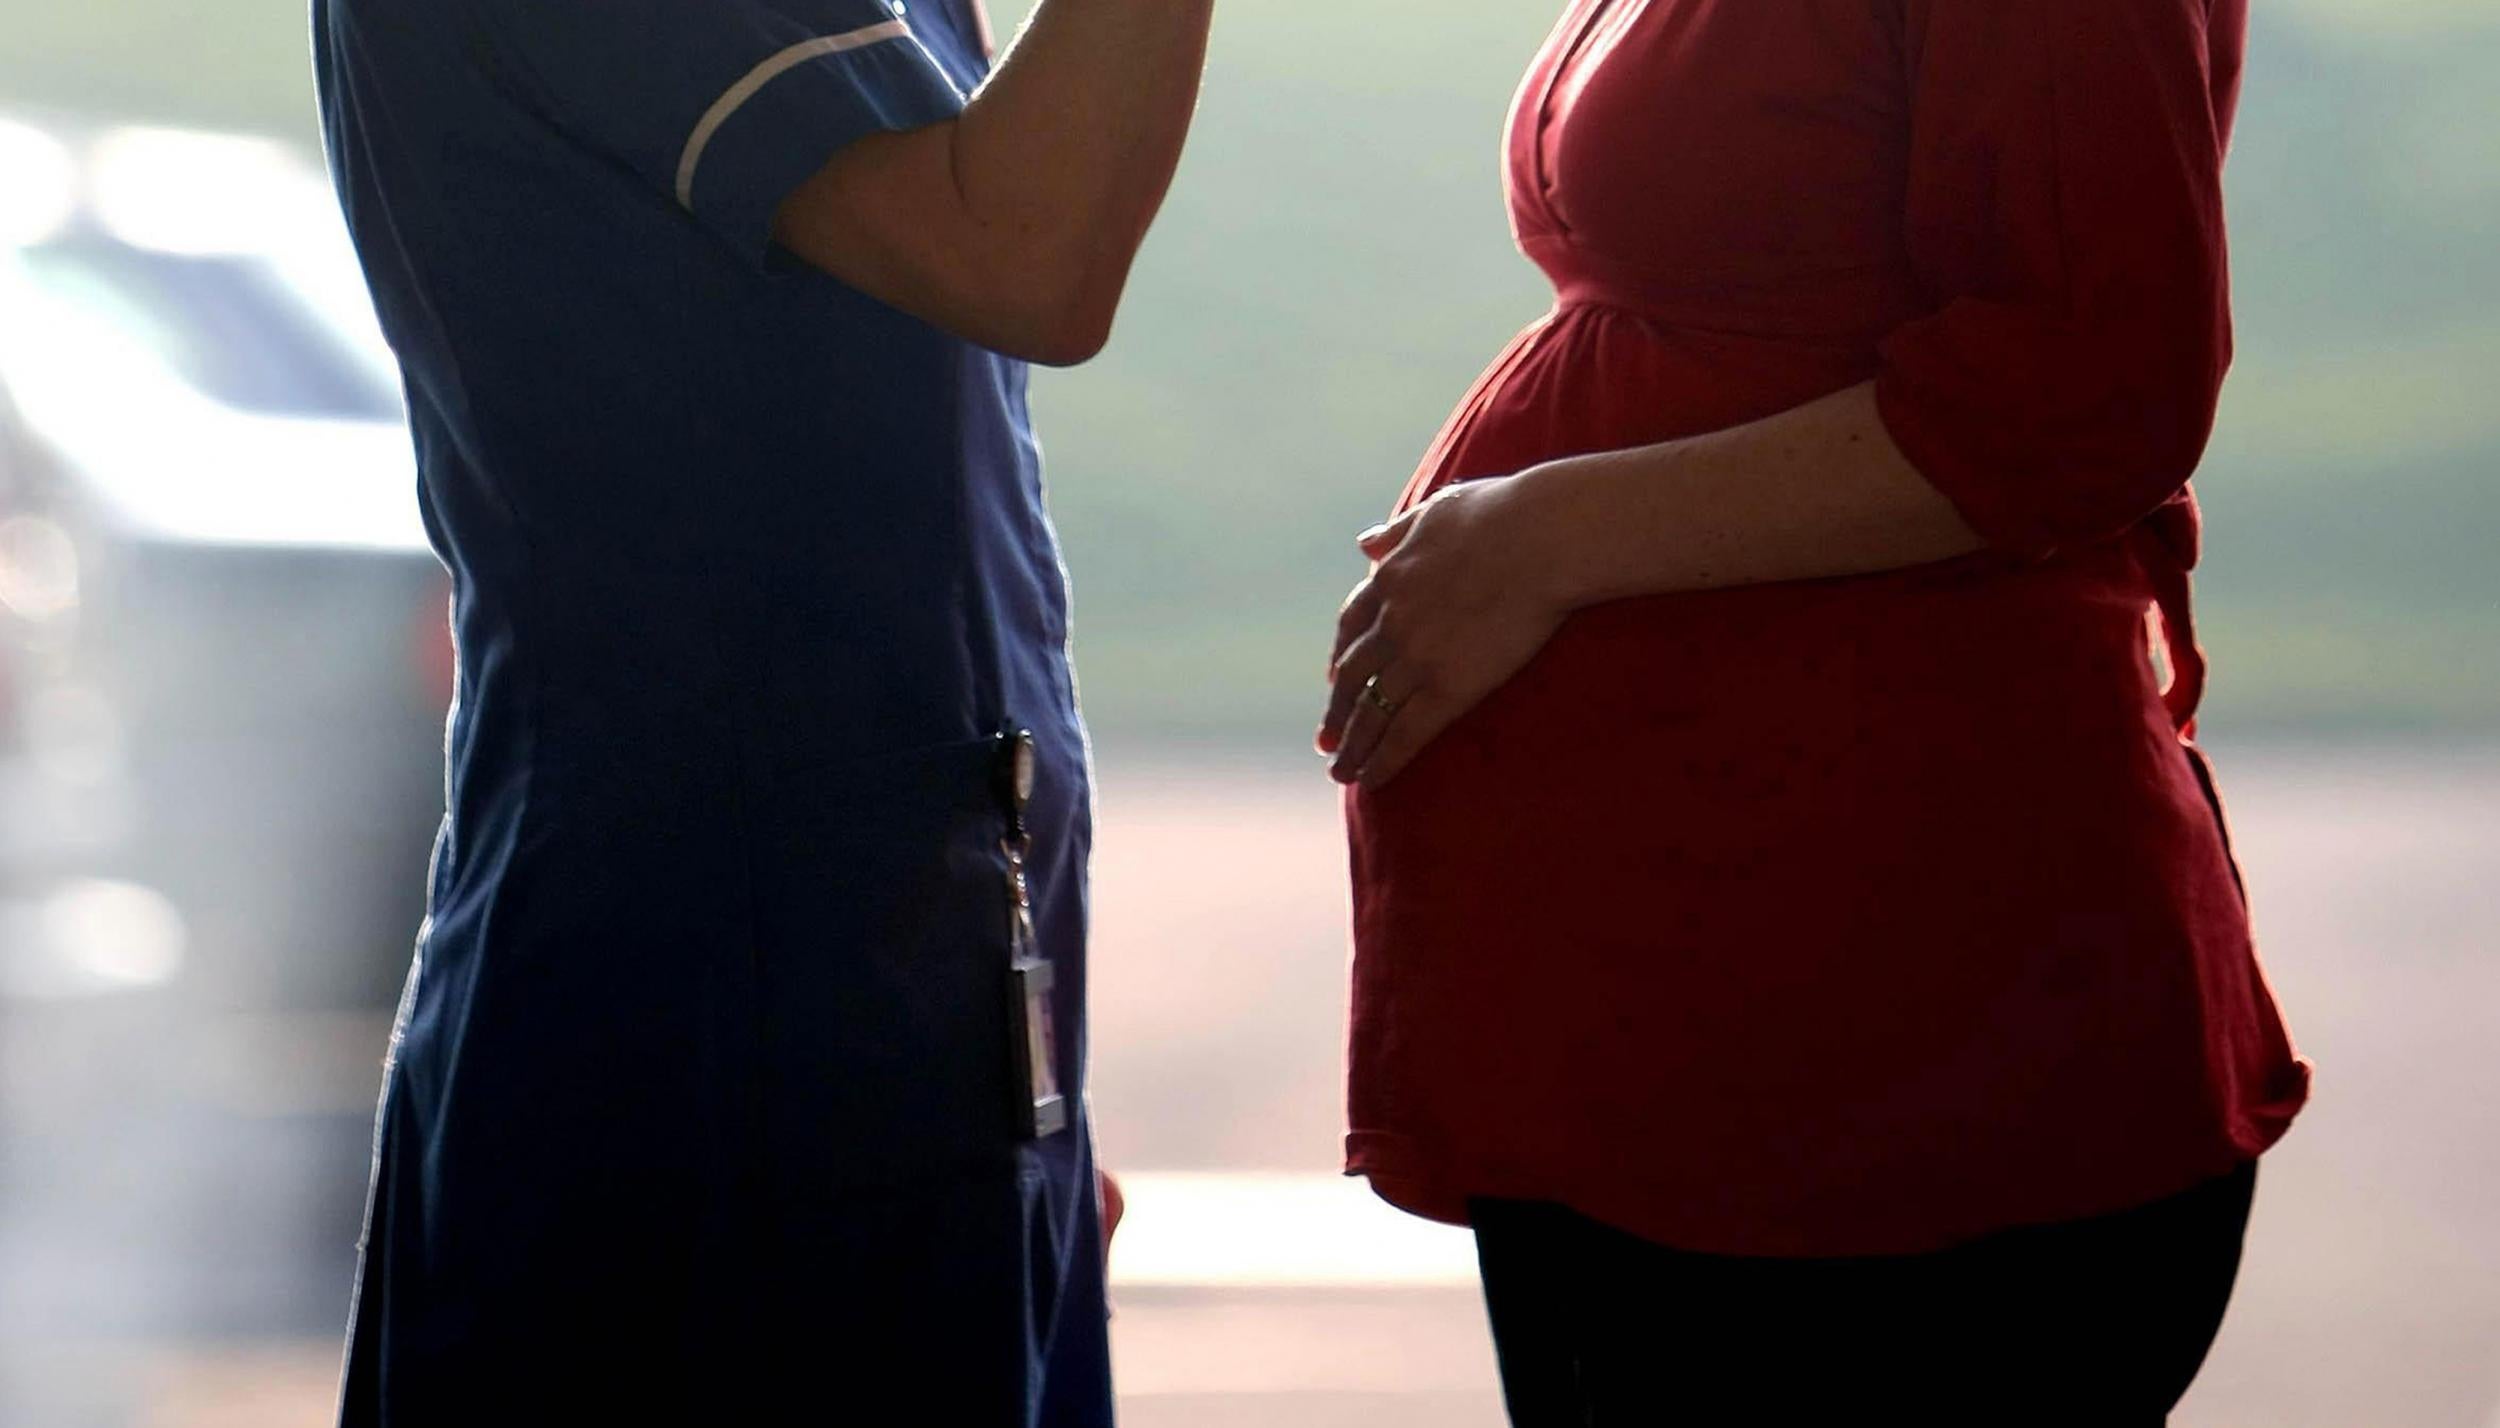 Maternity units are short of staff and need to improve on safety